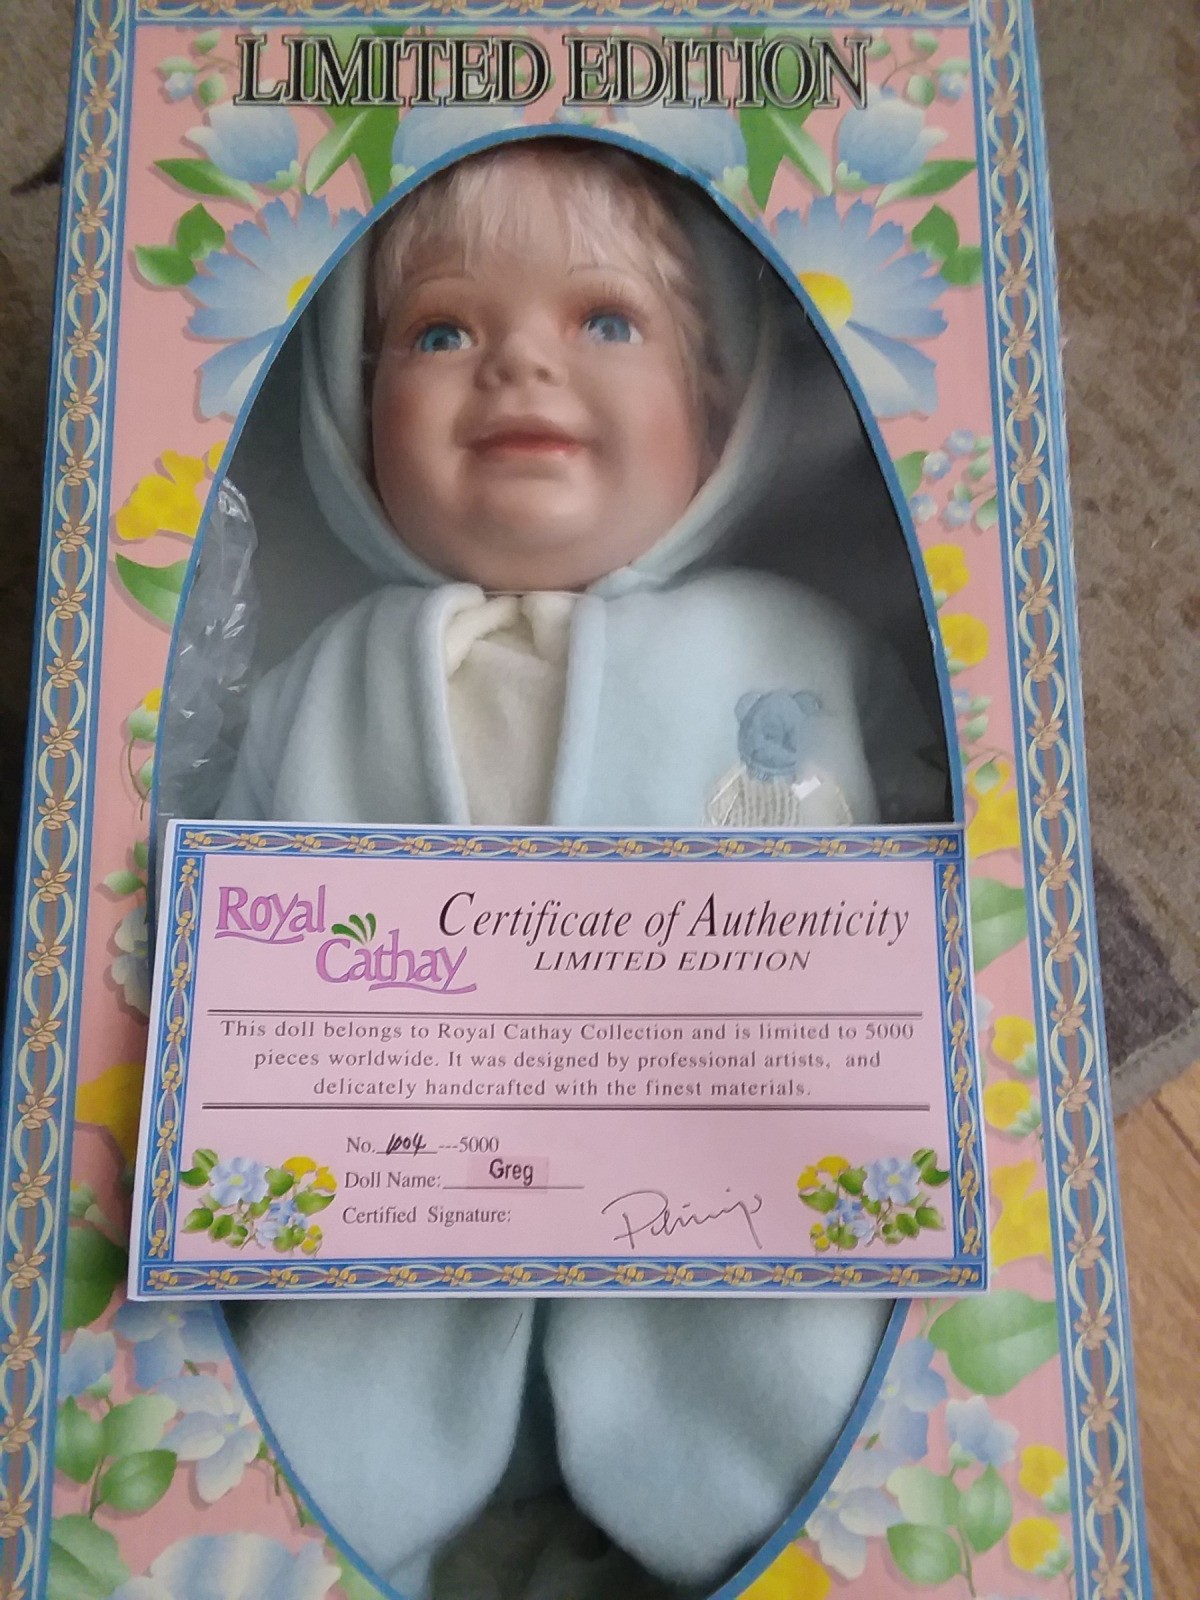 royal cathay collection doll limited edition